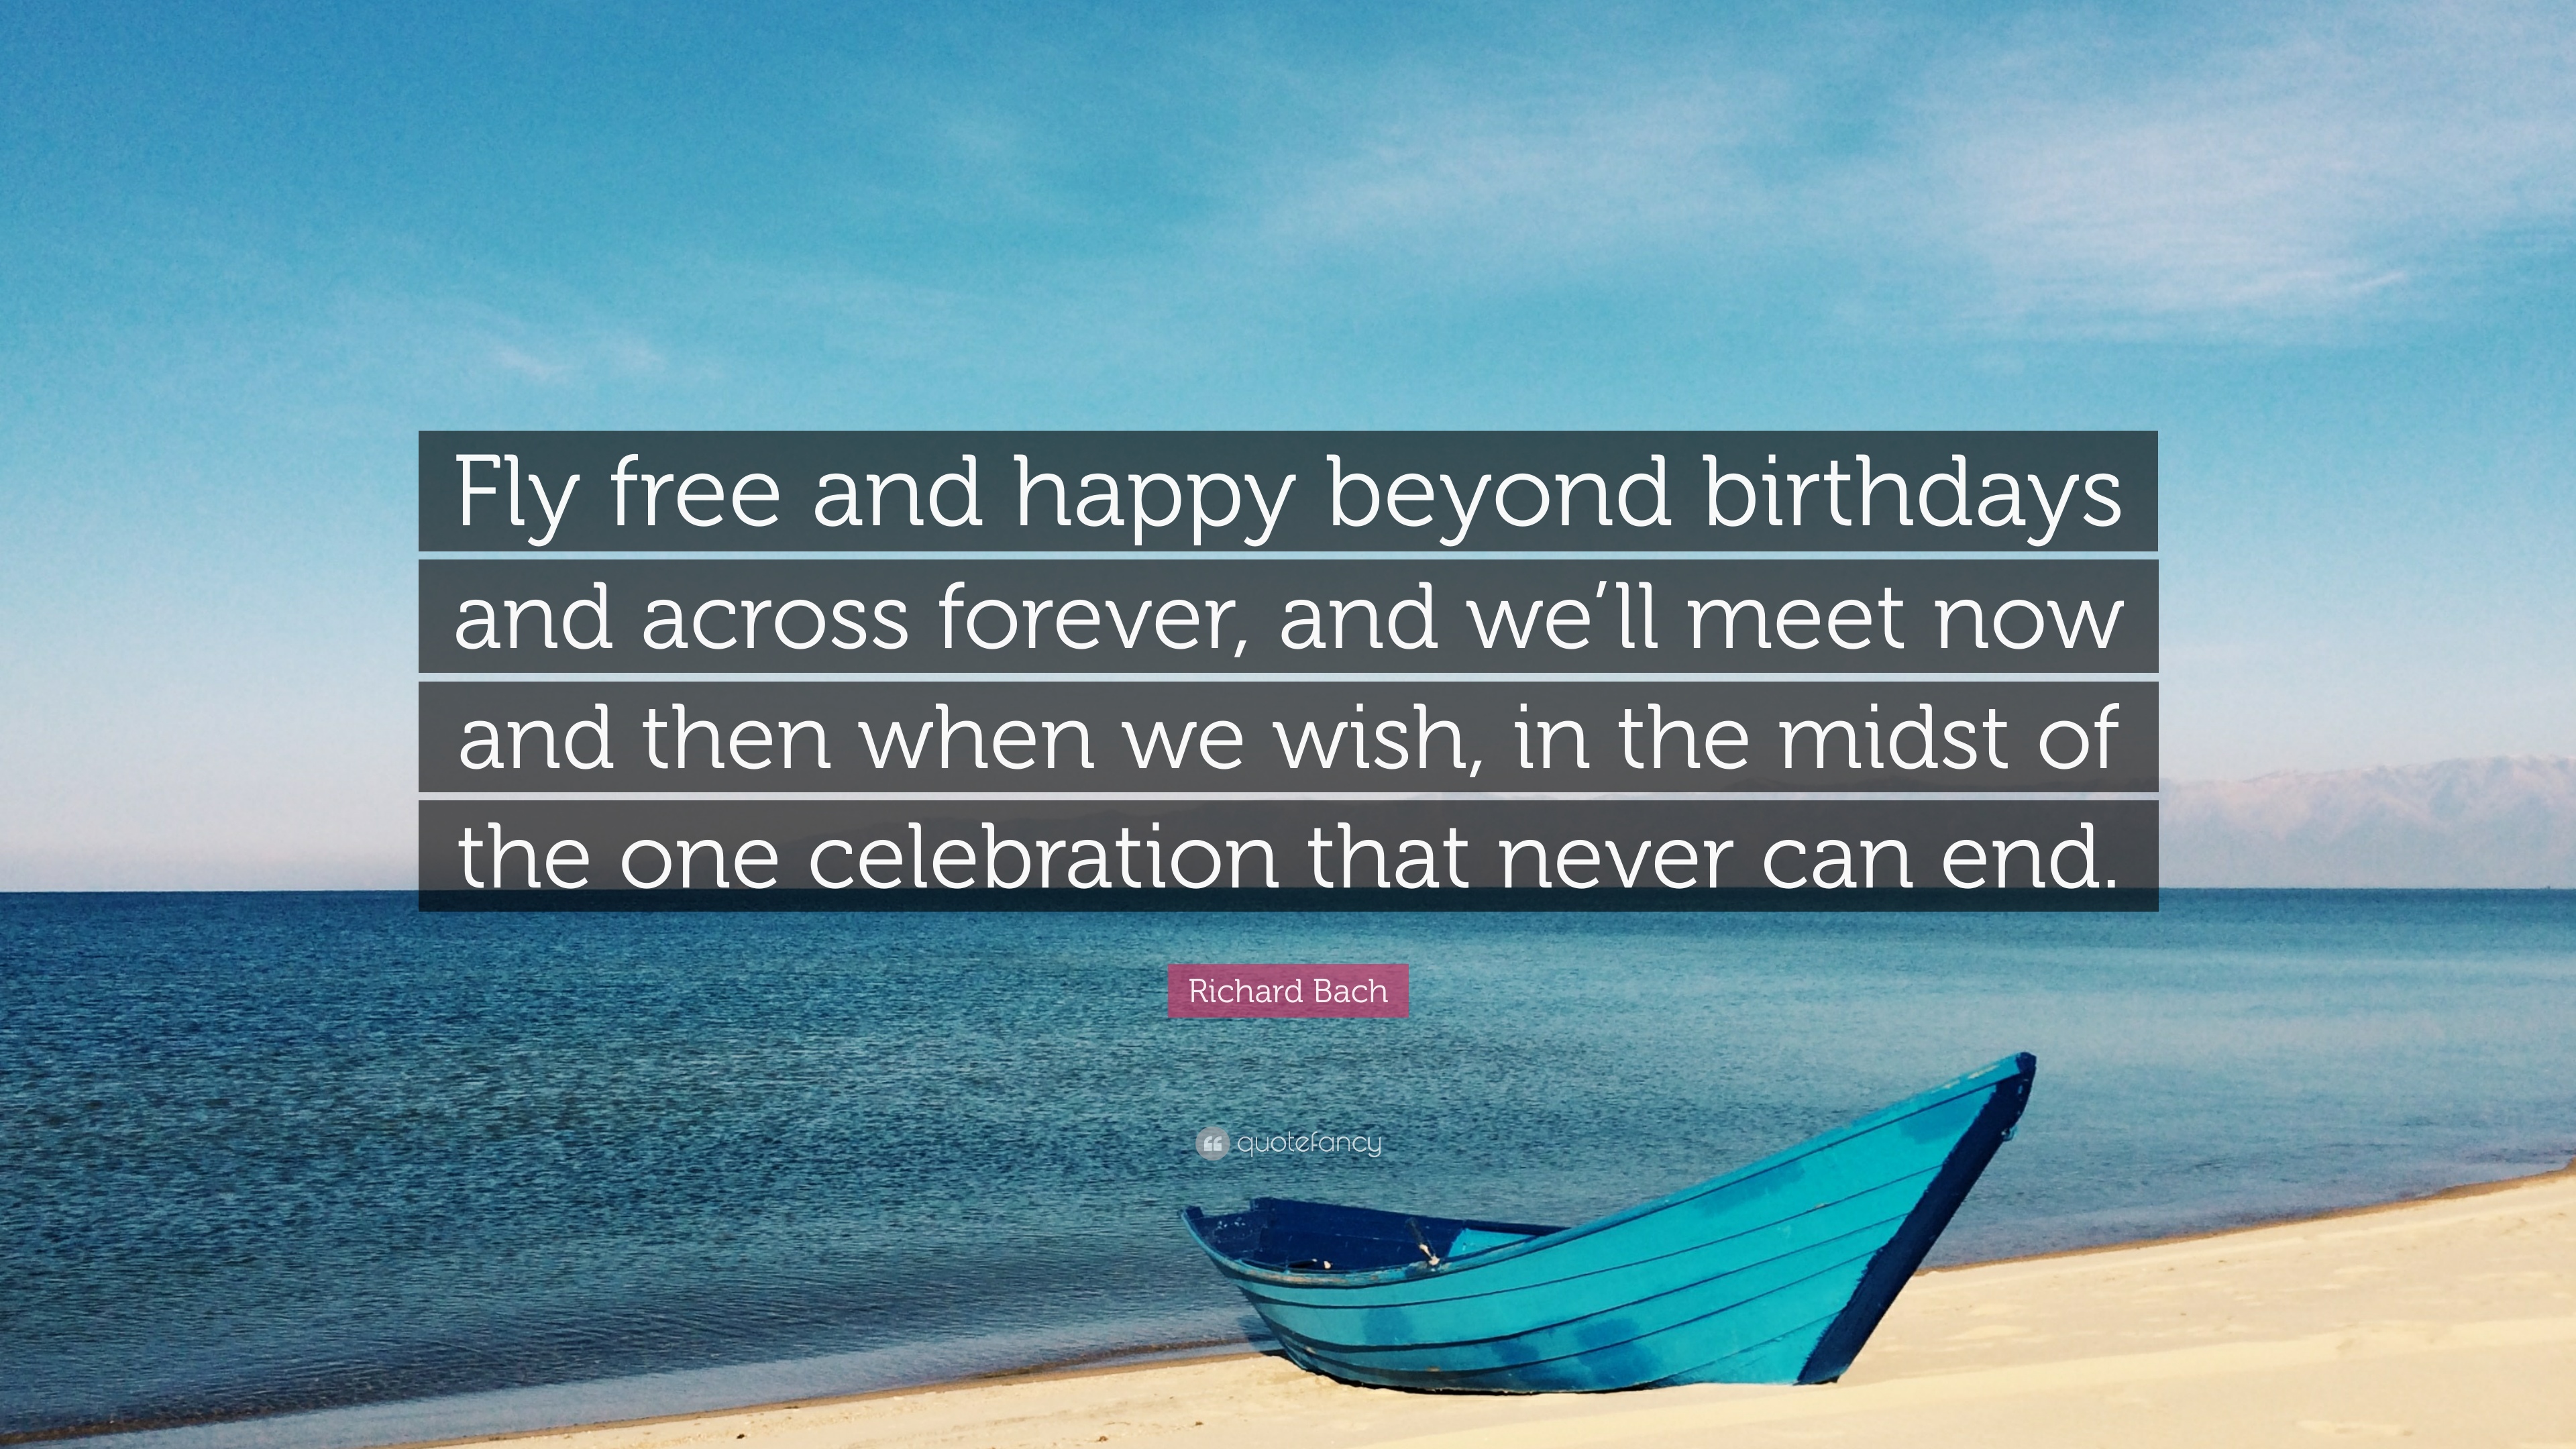 Richard Bach Quote: “Fly free and happy beyond birthdays and across ...